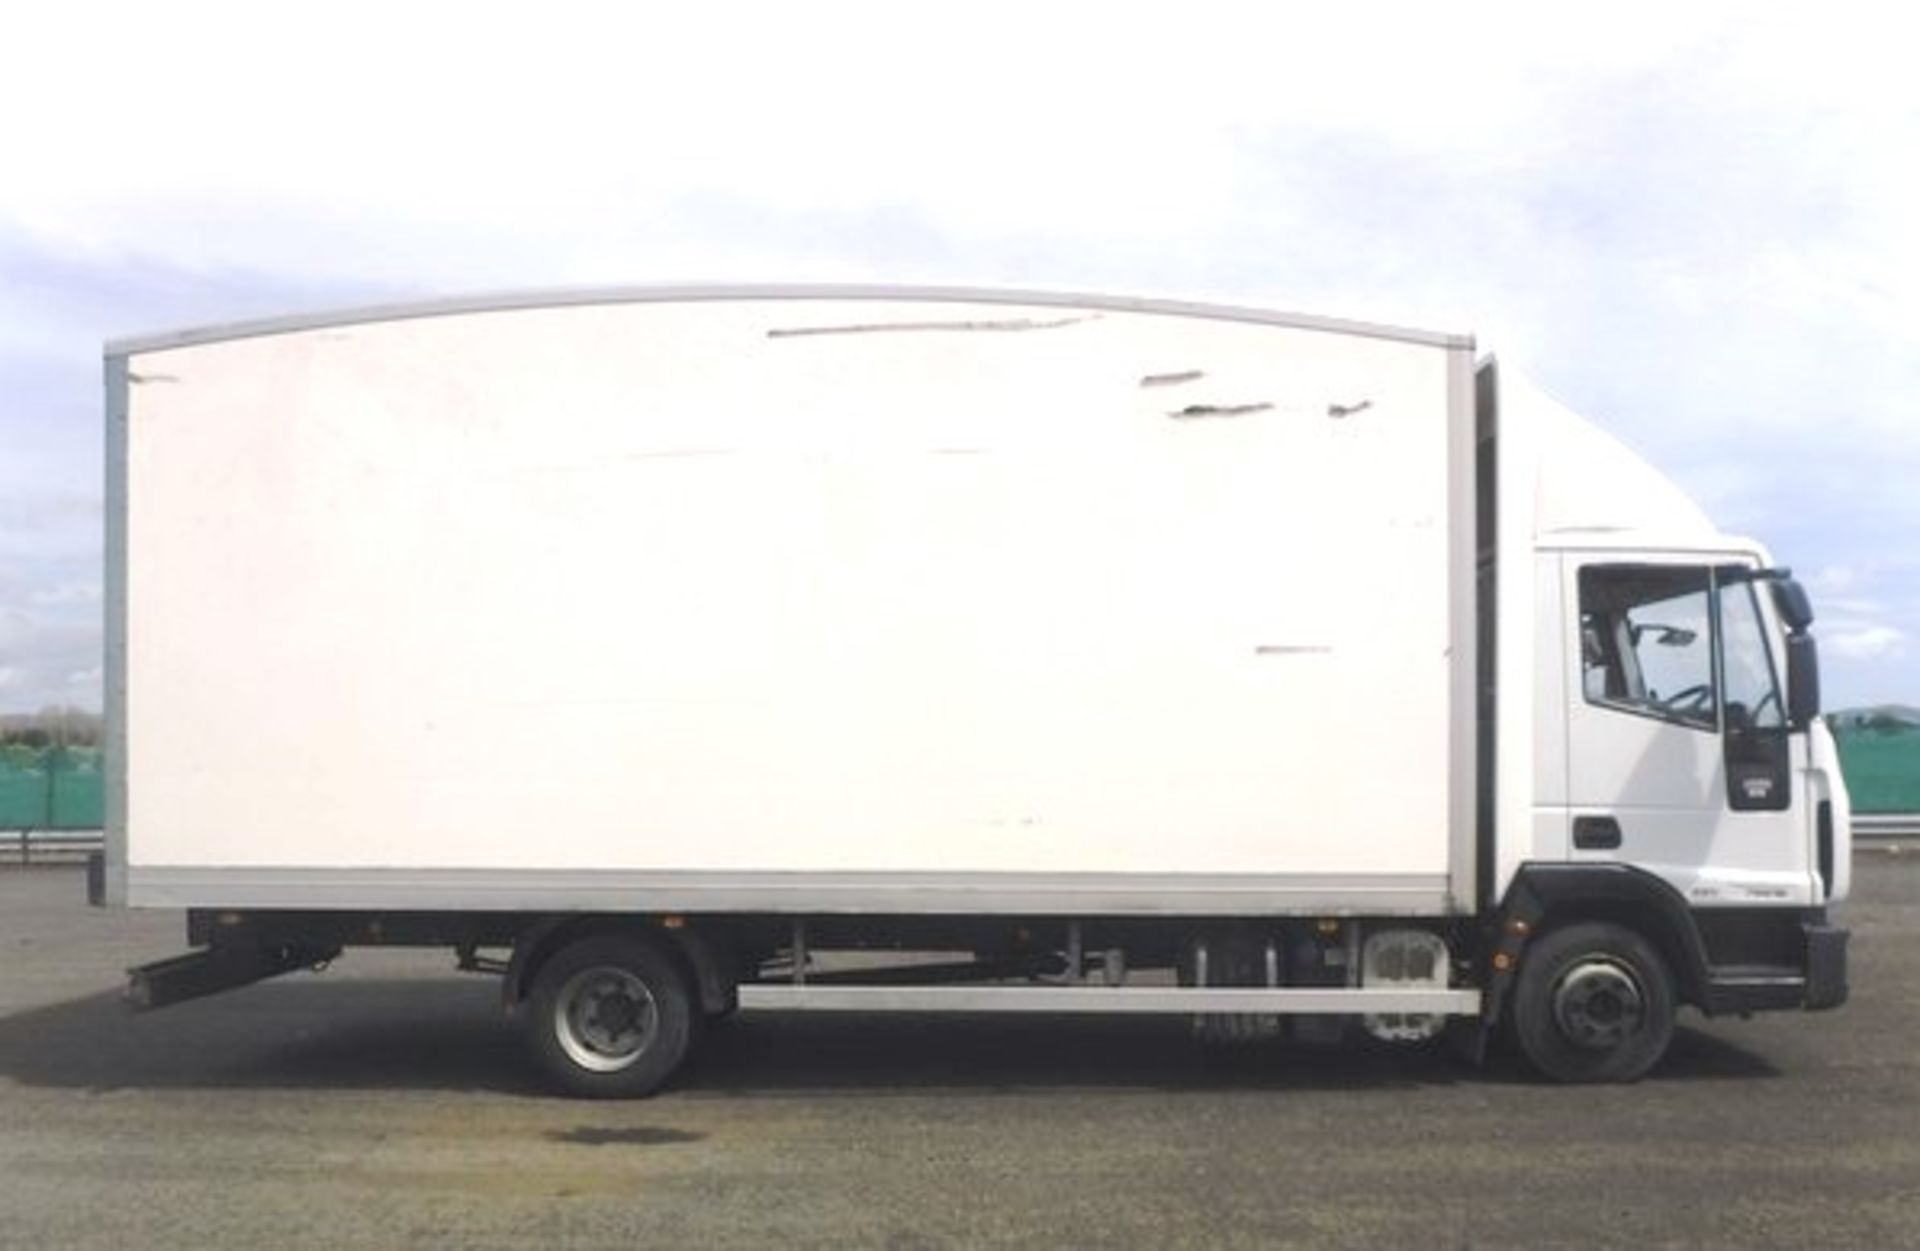 IVECO MODEL EUROCARGO (MY 2008) - 3920cc - Image 4 of 20